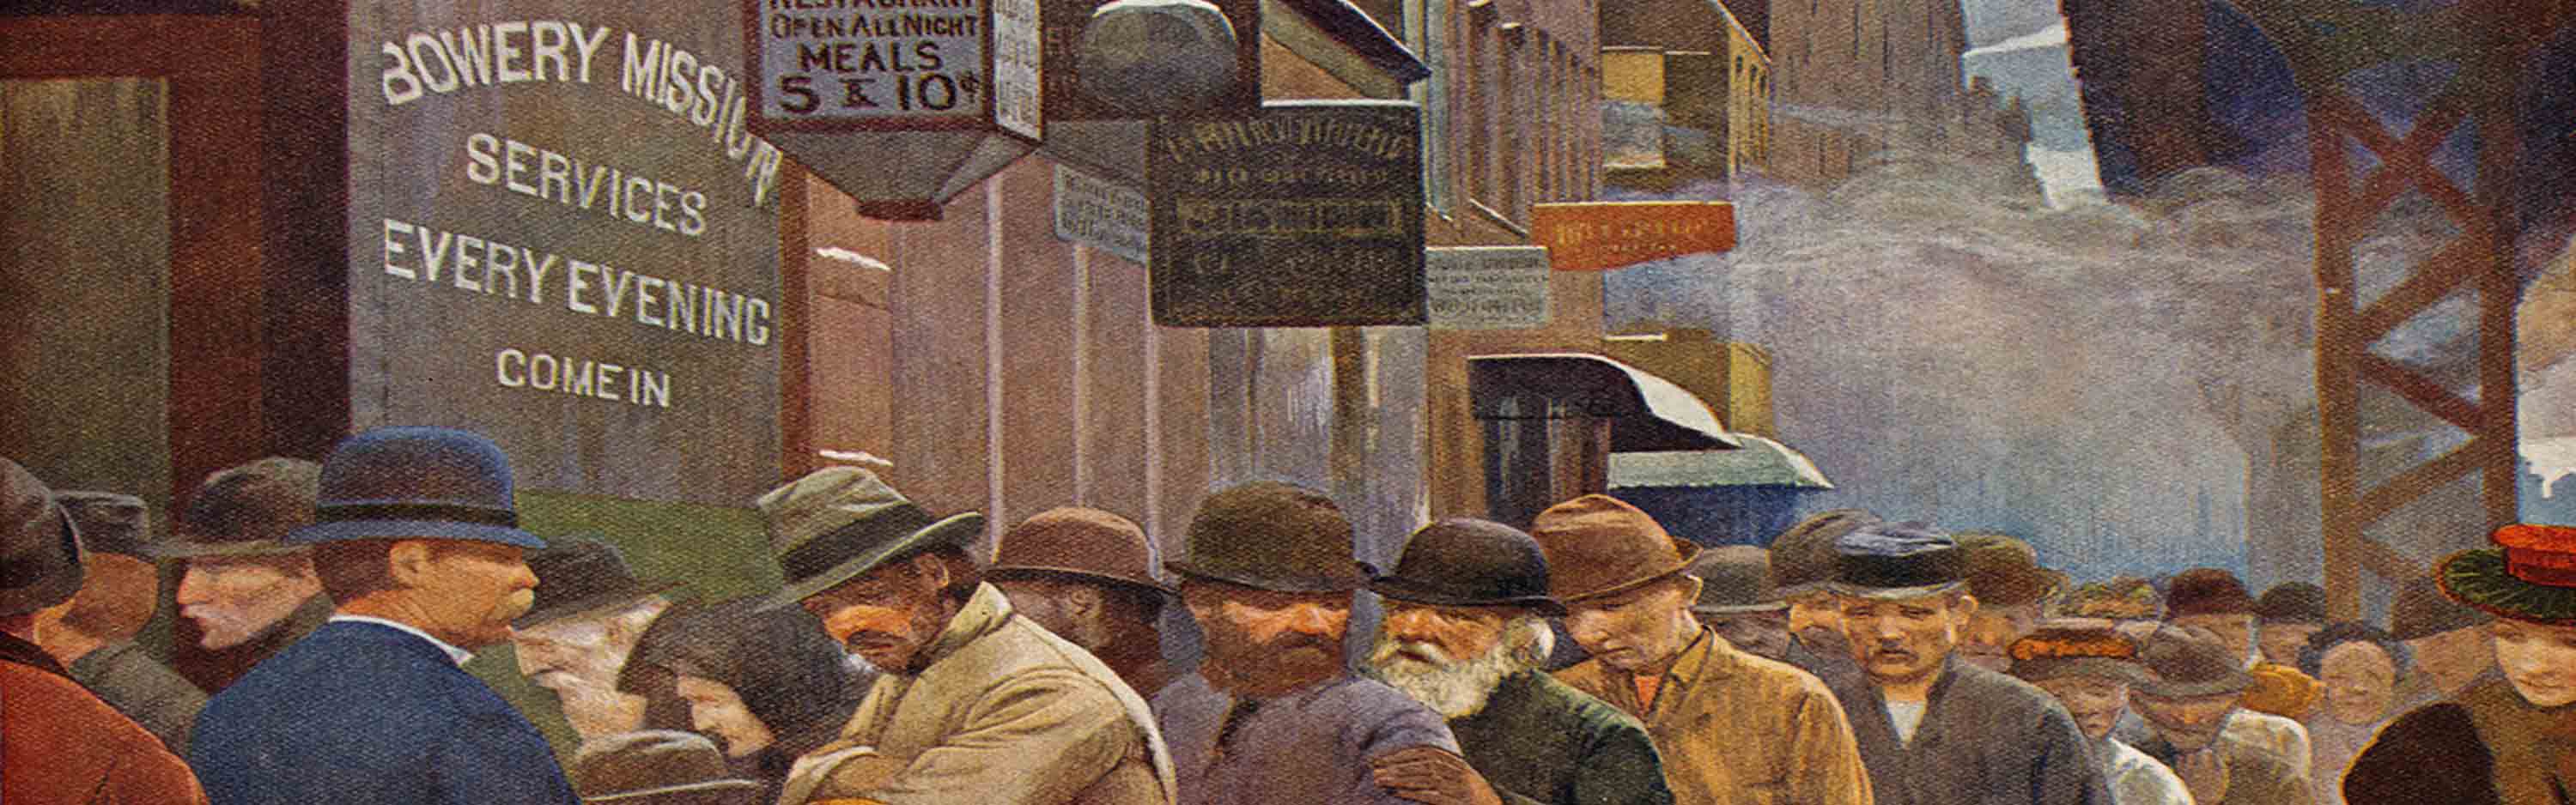 Illustration from the cover of the Christian Herald, December 30, 1896, showing men in the bread line at the Bowery Mission, New York